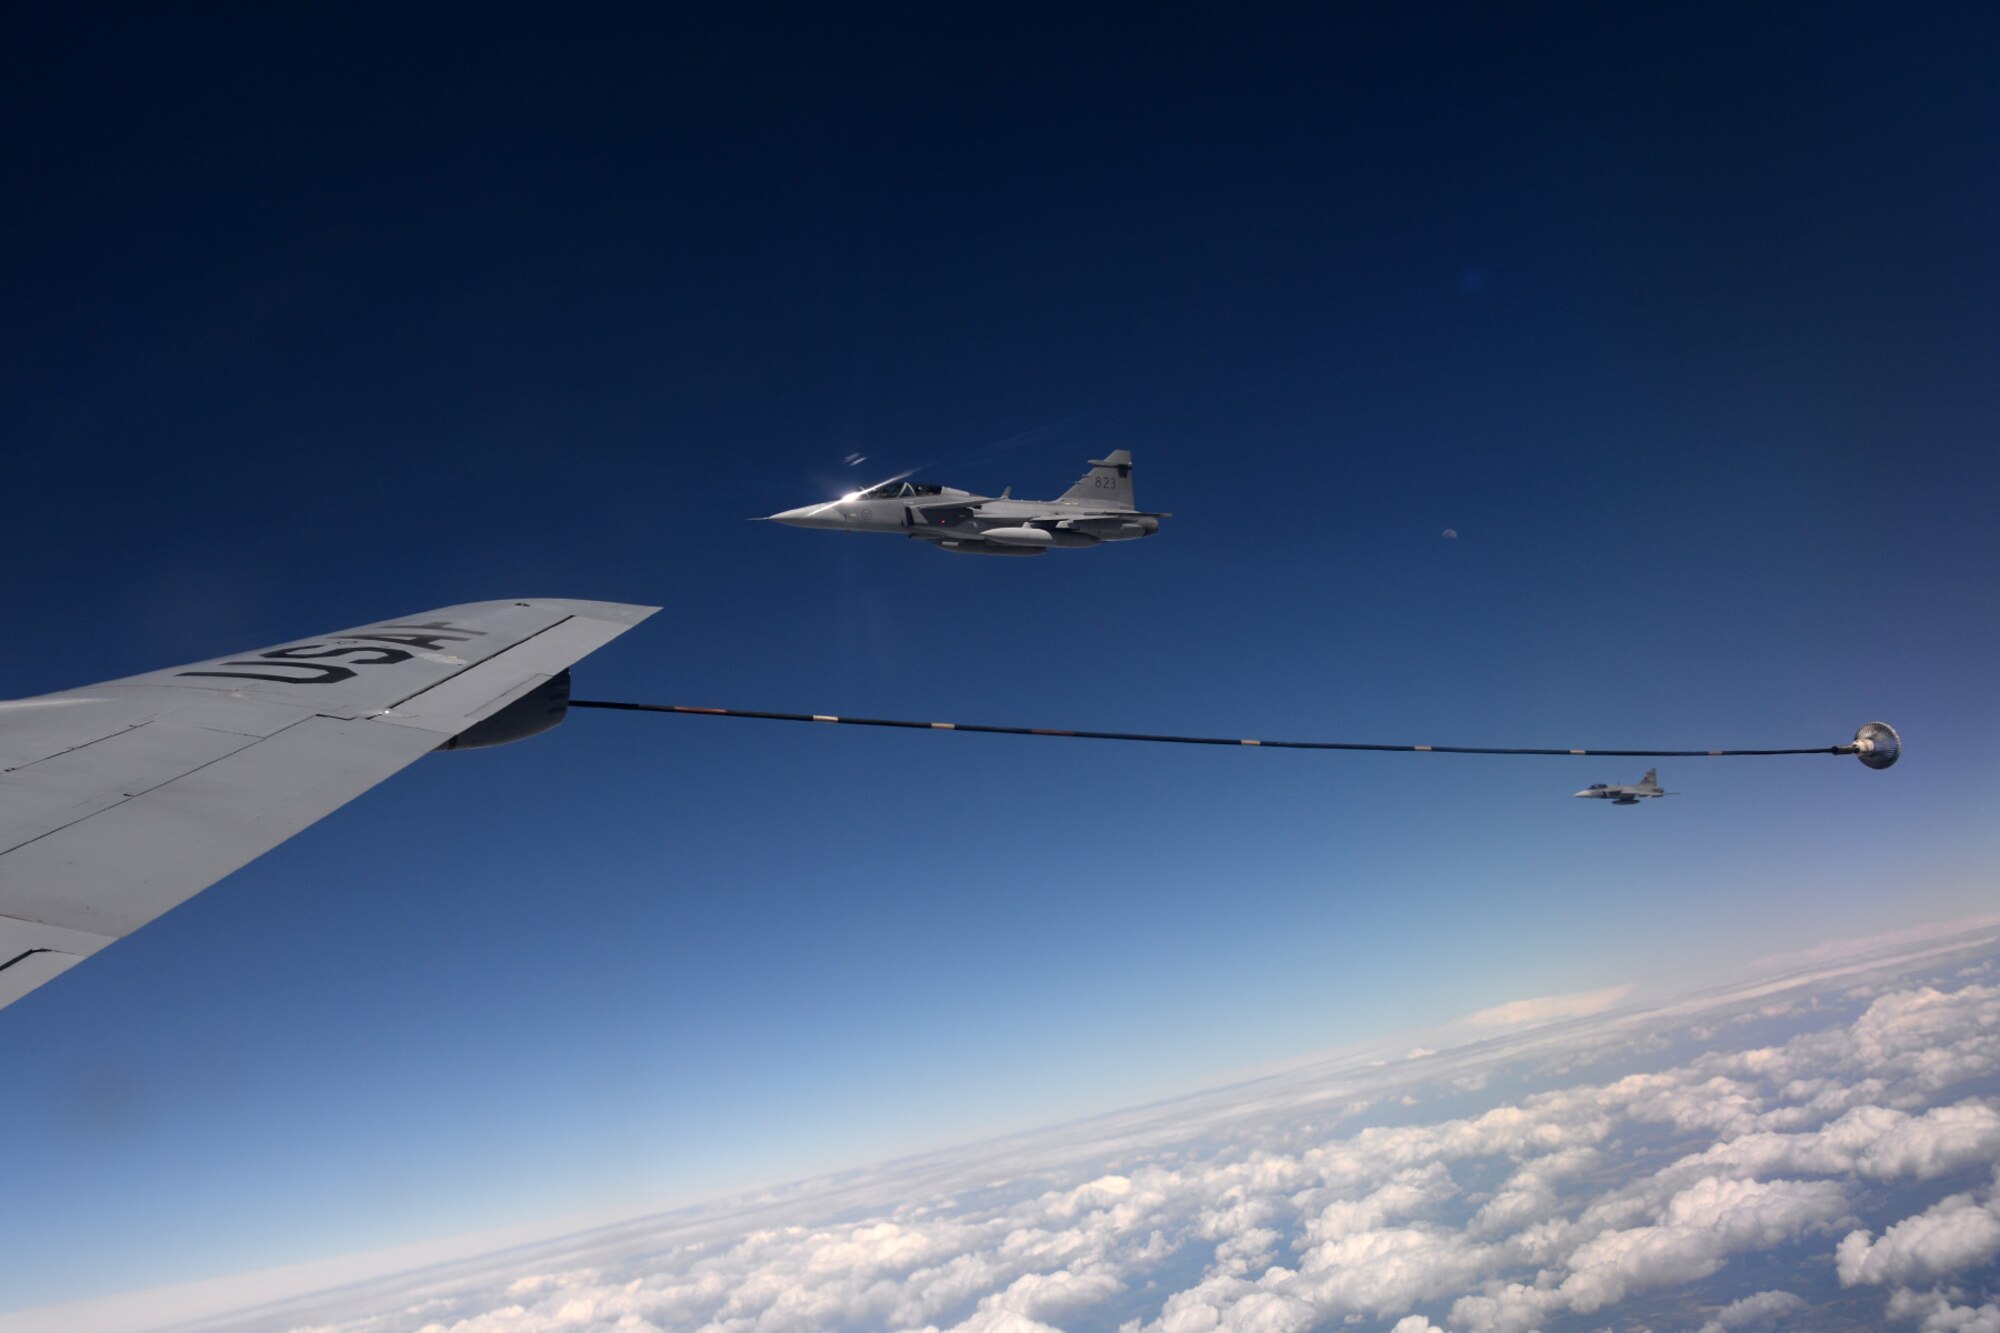 Swedish and Hungarian air force JAS-39 Gripens fly next to a U.S. Air Force KC-135 Stratotanker June 25, 2015, during air refueling familiarization training over Hungary. Hungarian, U.S. and Swedish air force personnel met for a two-week familiarization period enabling the Hungarian JAS-39 Gripen pilots to successfully perform air refueling for the first time. (U.S. Air Force photo by Senior Airman Kate Thornton/Released)